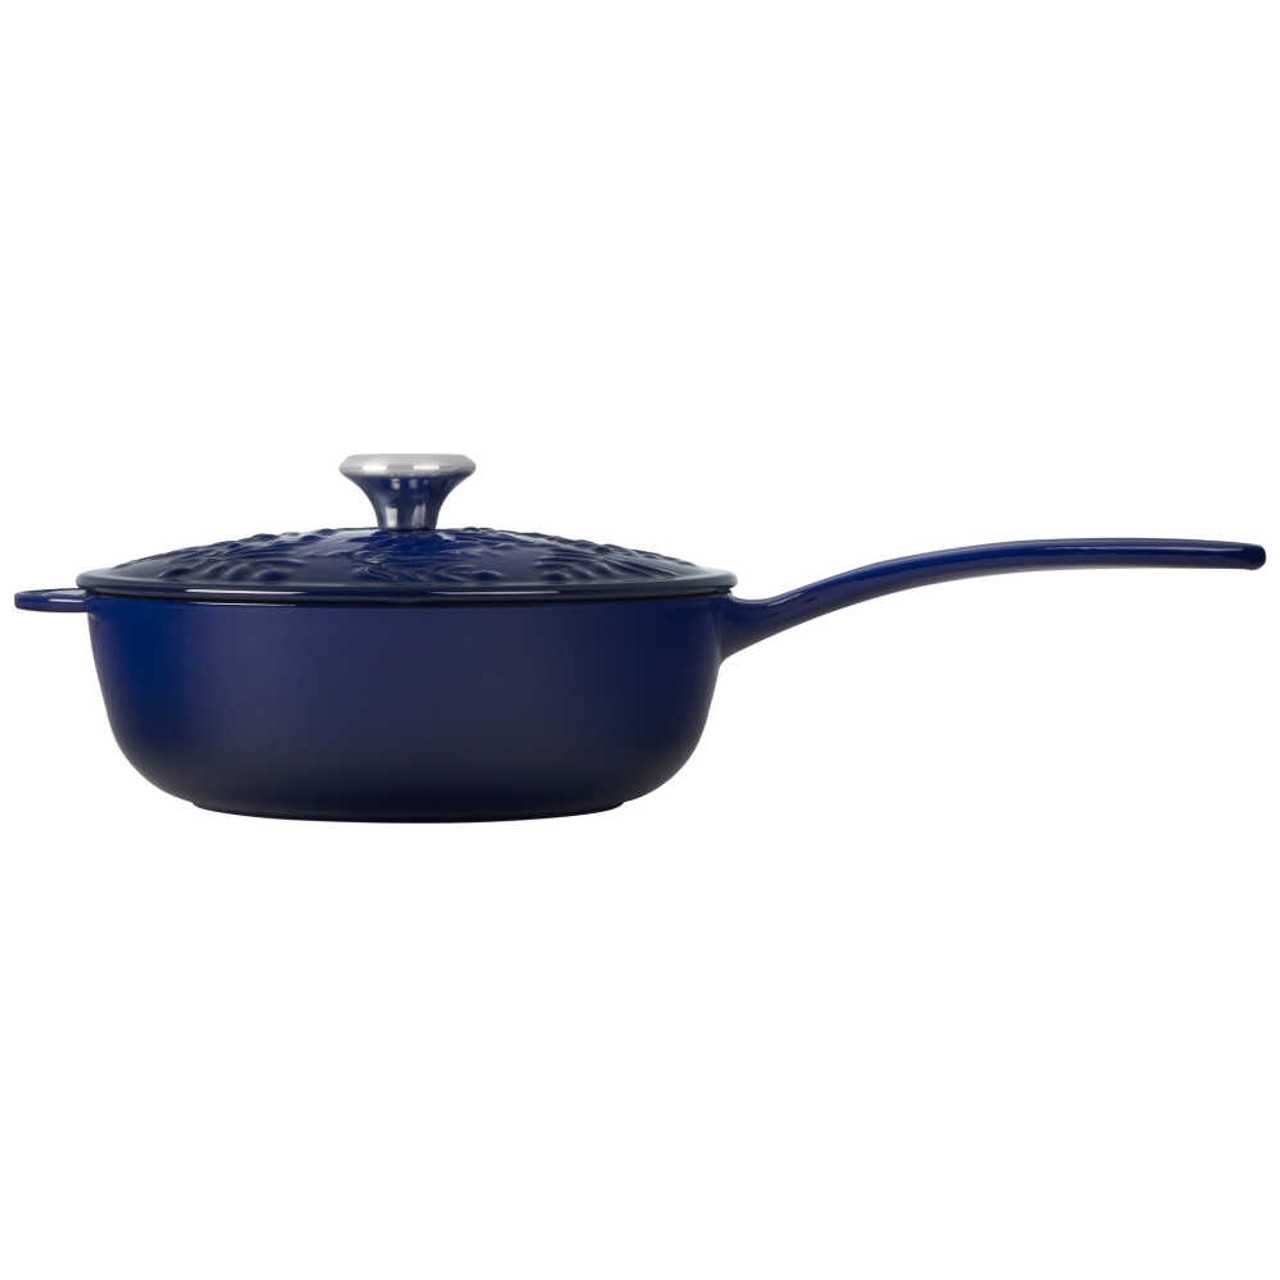 https://cdn11.bigcommerce.com/s-hccytny0od/images/stencil/1280x1280/products/5504/24026/Le_Creuset_Olive_Branch_Collection_Saucier_in_Indigo__79755.1688651634.jpg?c=2?imbypass=on